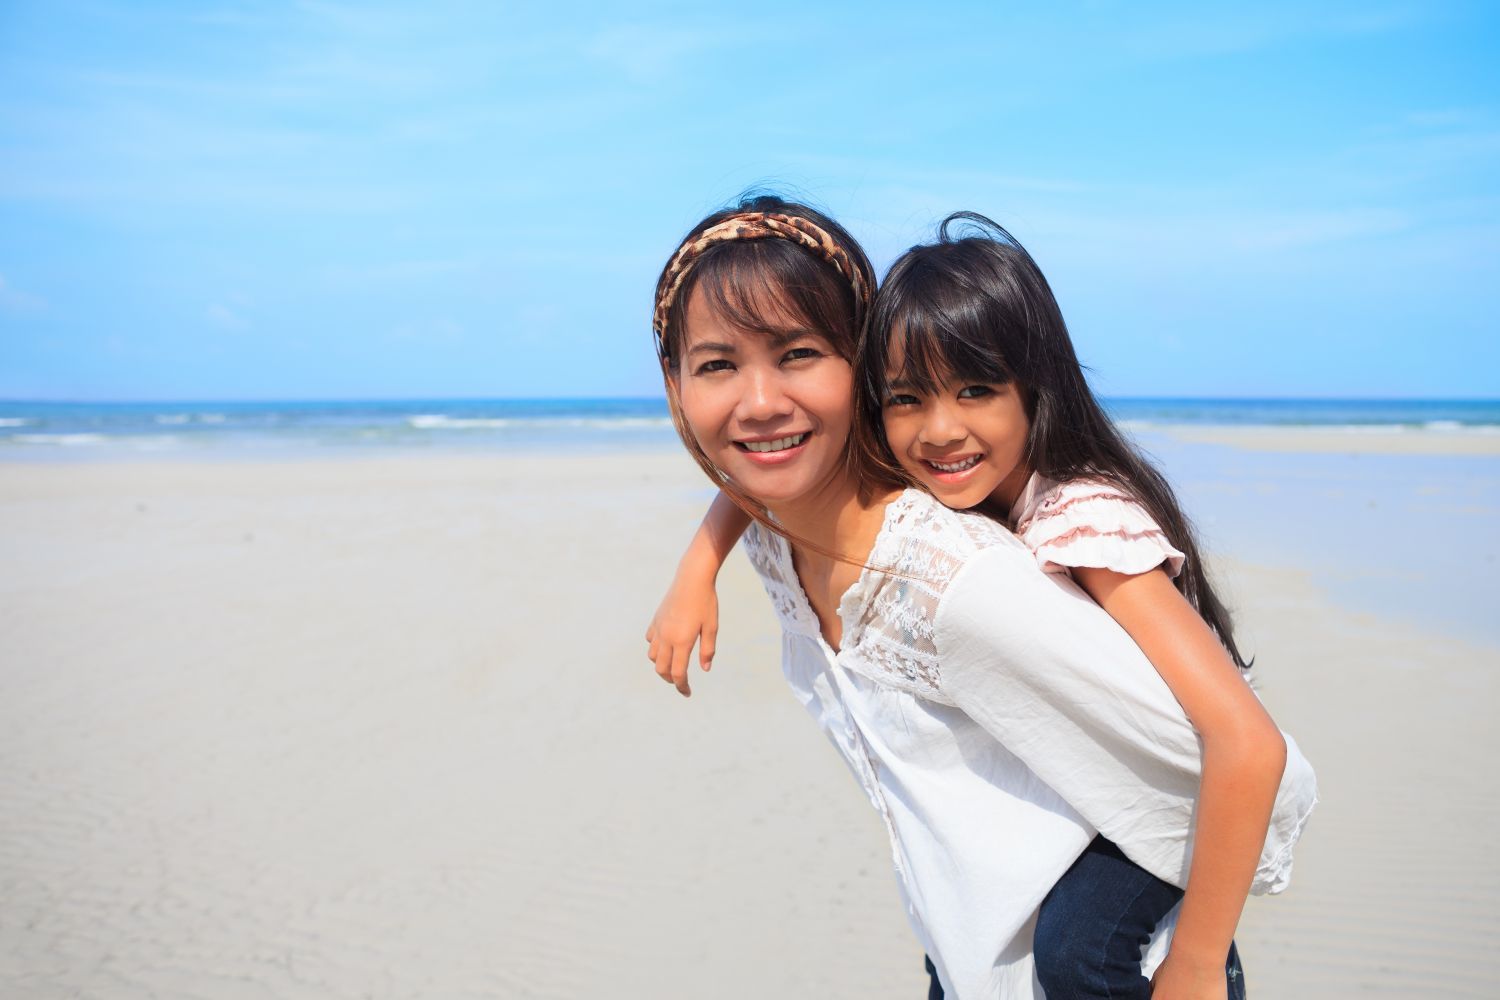 Dentist and assistant with young child, we specialize in family dentistry in Kailua, HI